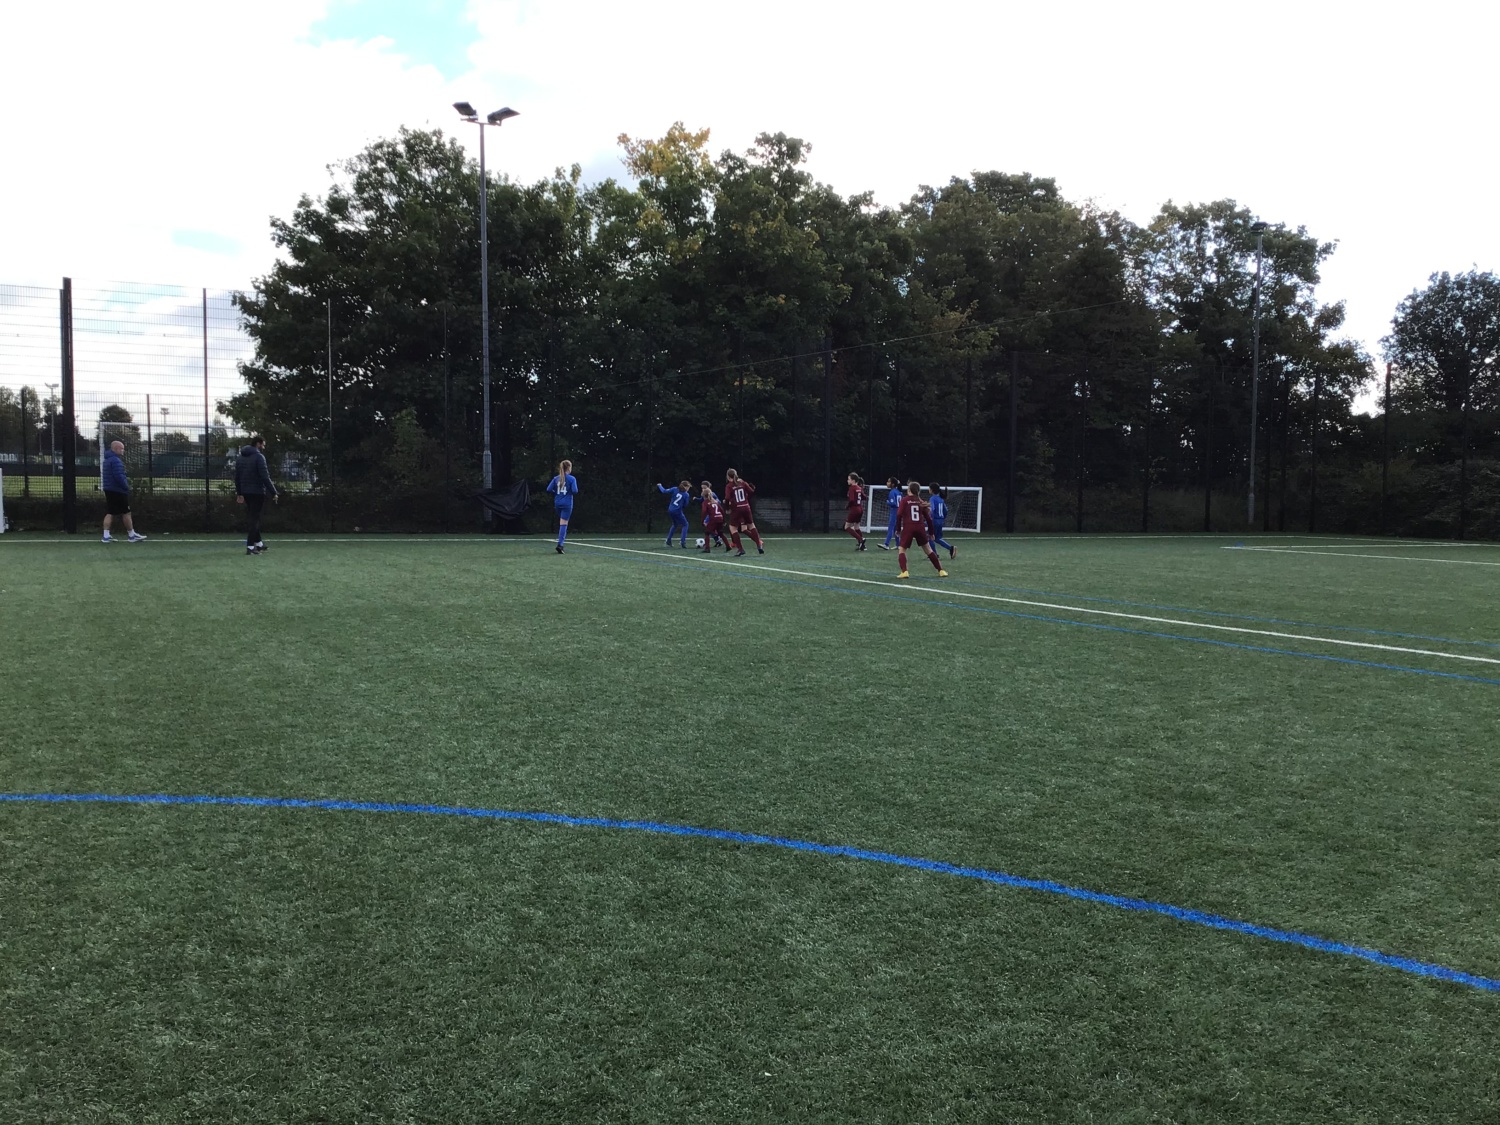 Two teams of students, in blue and red kits, playing football on a football pitch